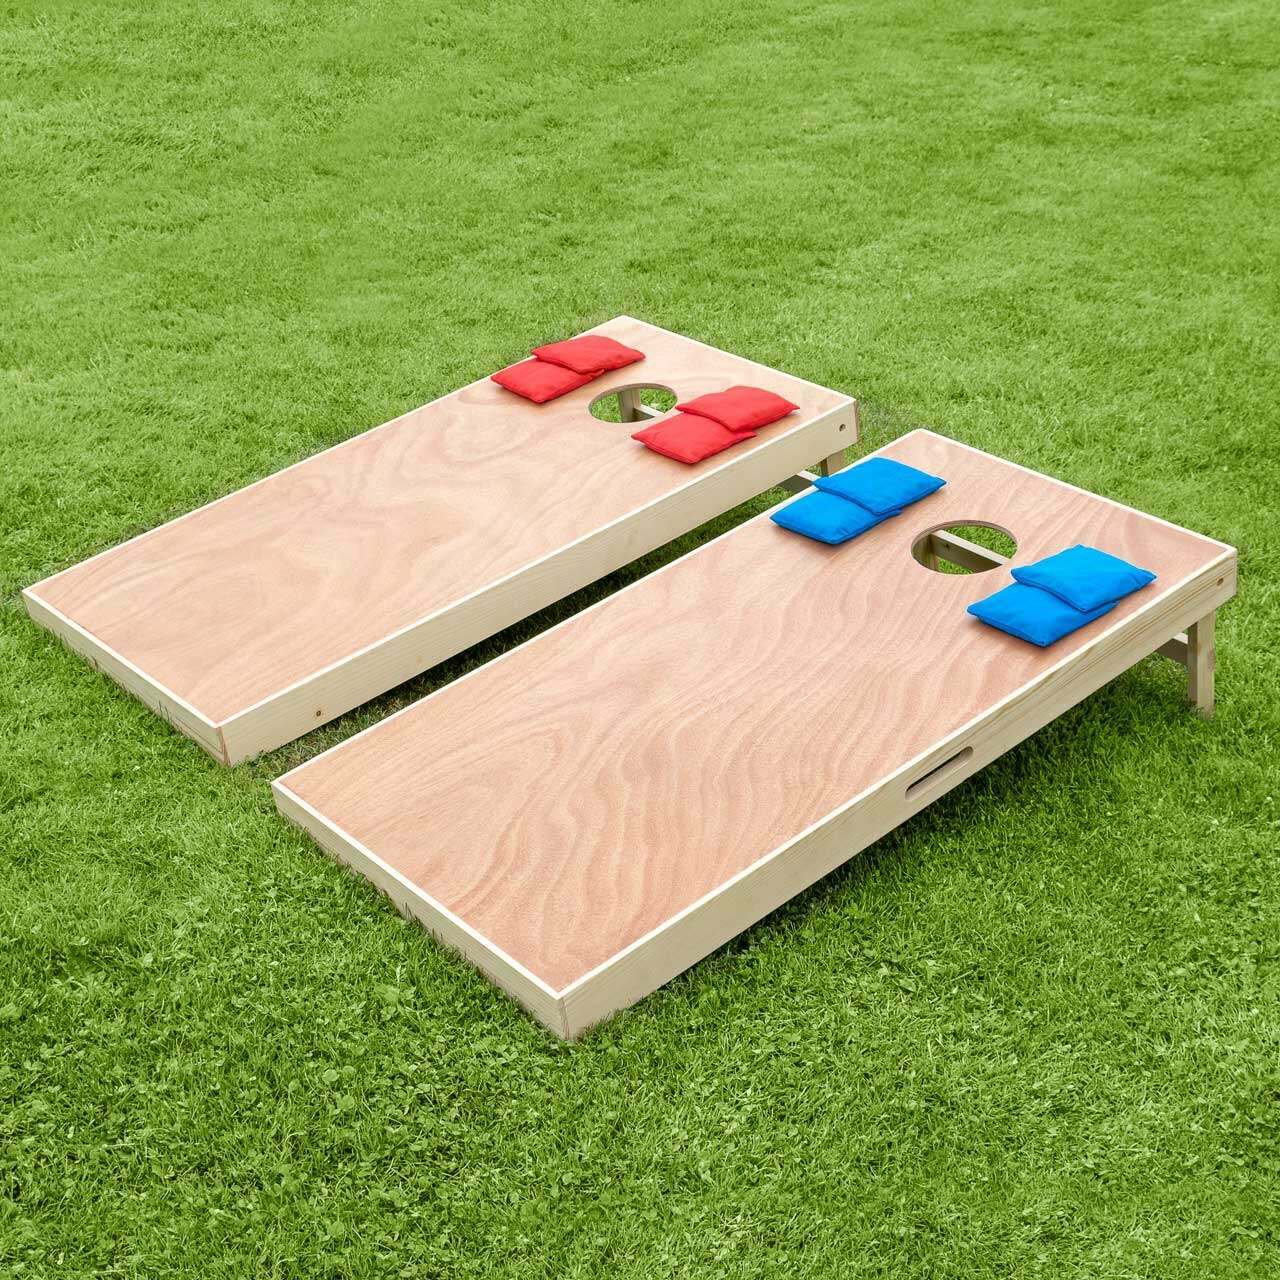 What Are The Best Cornhole Boards?